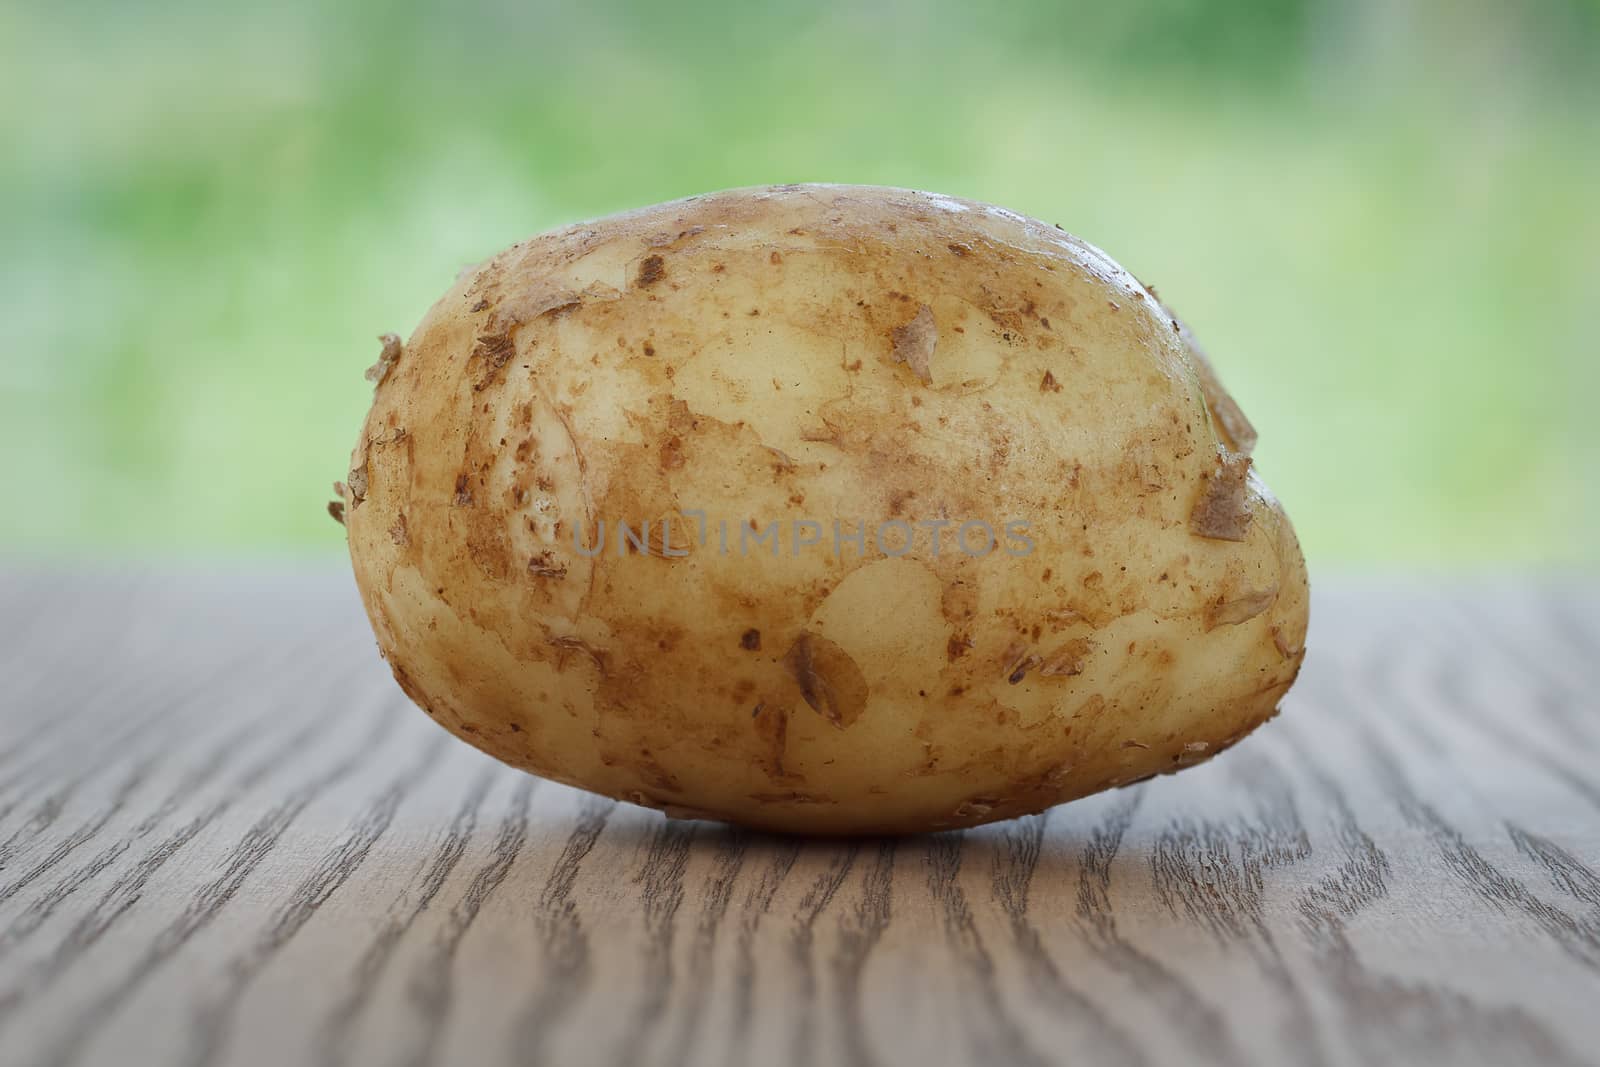 One raw potato lying on the wooden background.